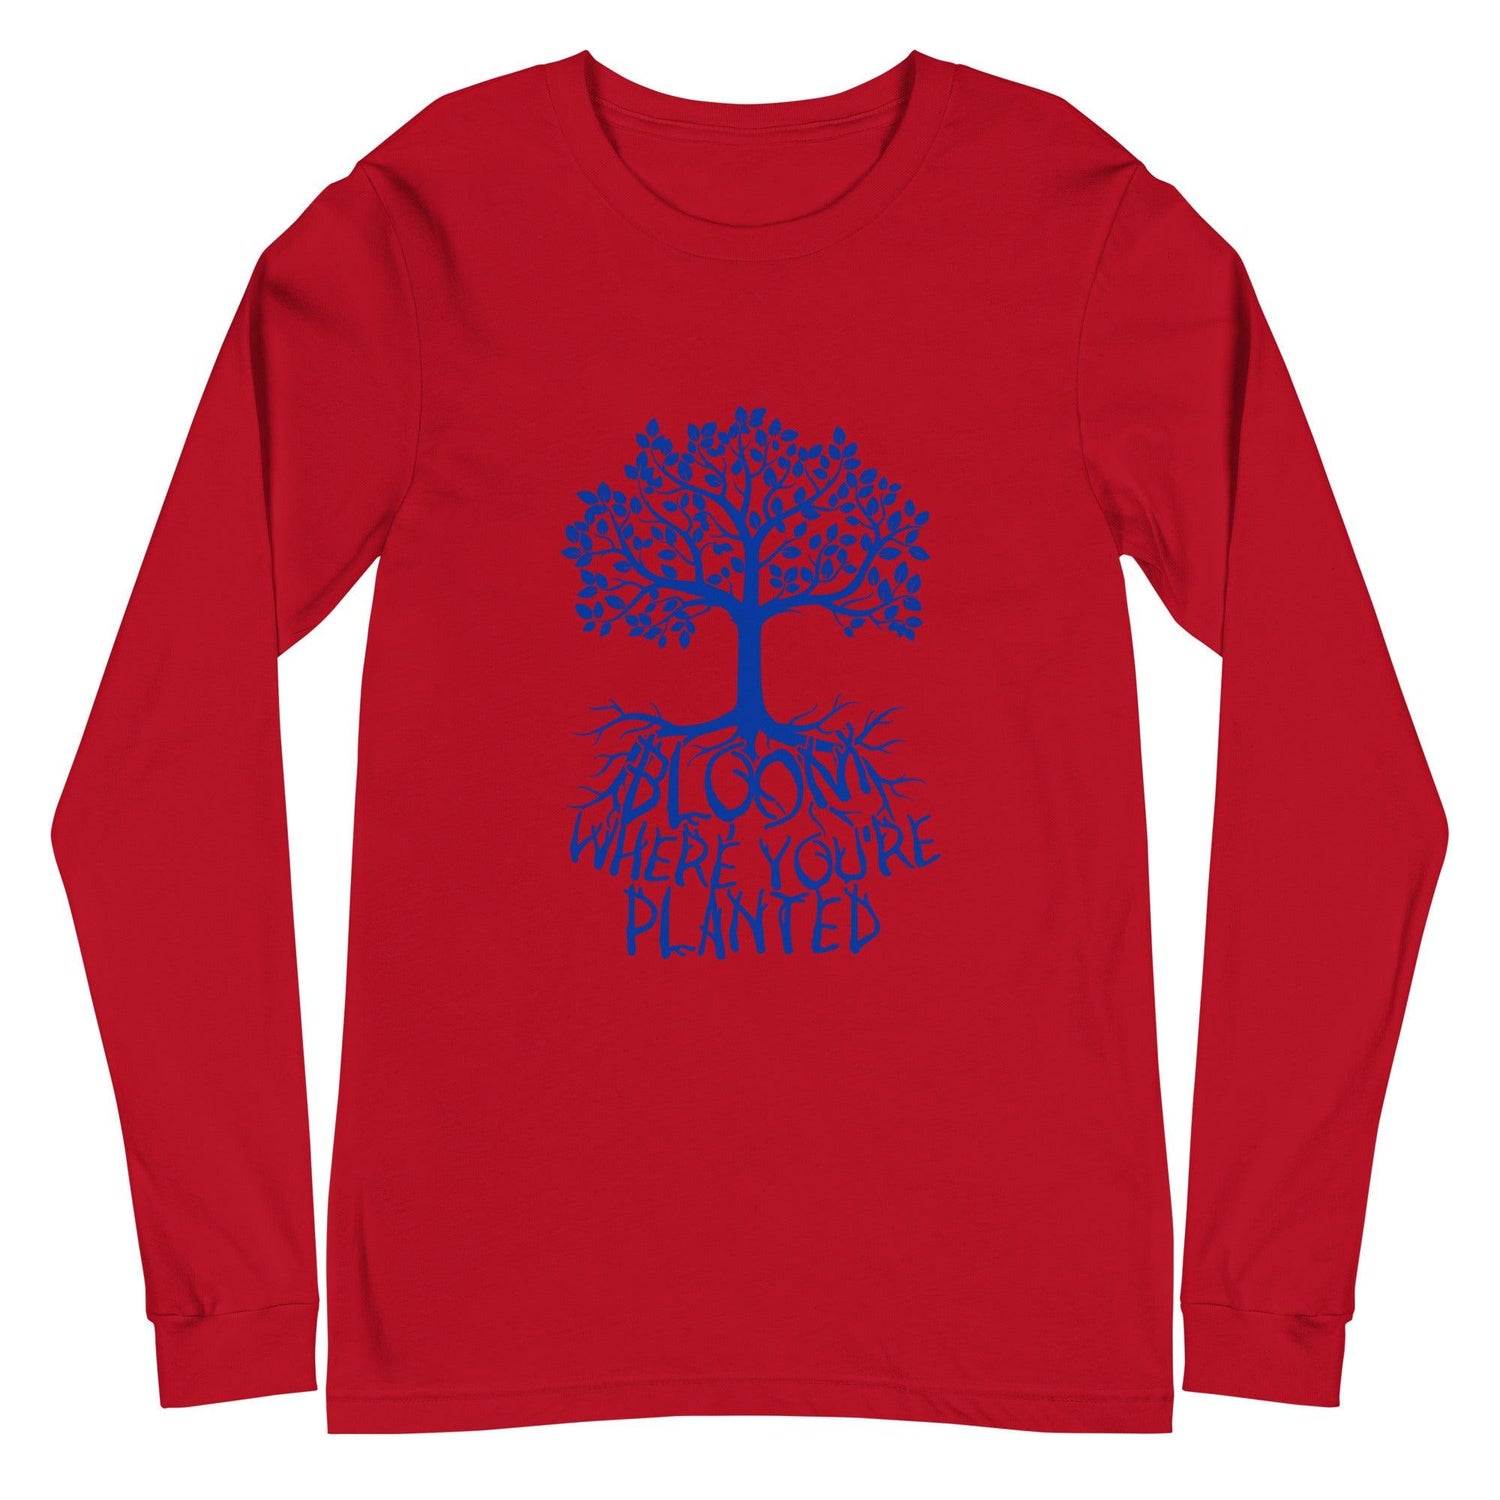 Nate Sestina "Where You're Planted" Long Sleeve Tee - Fan Arch